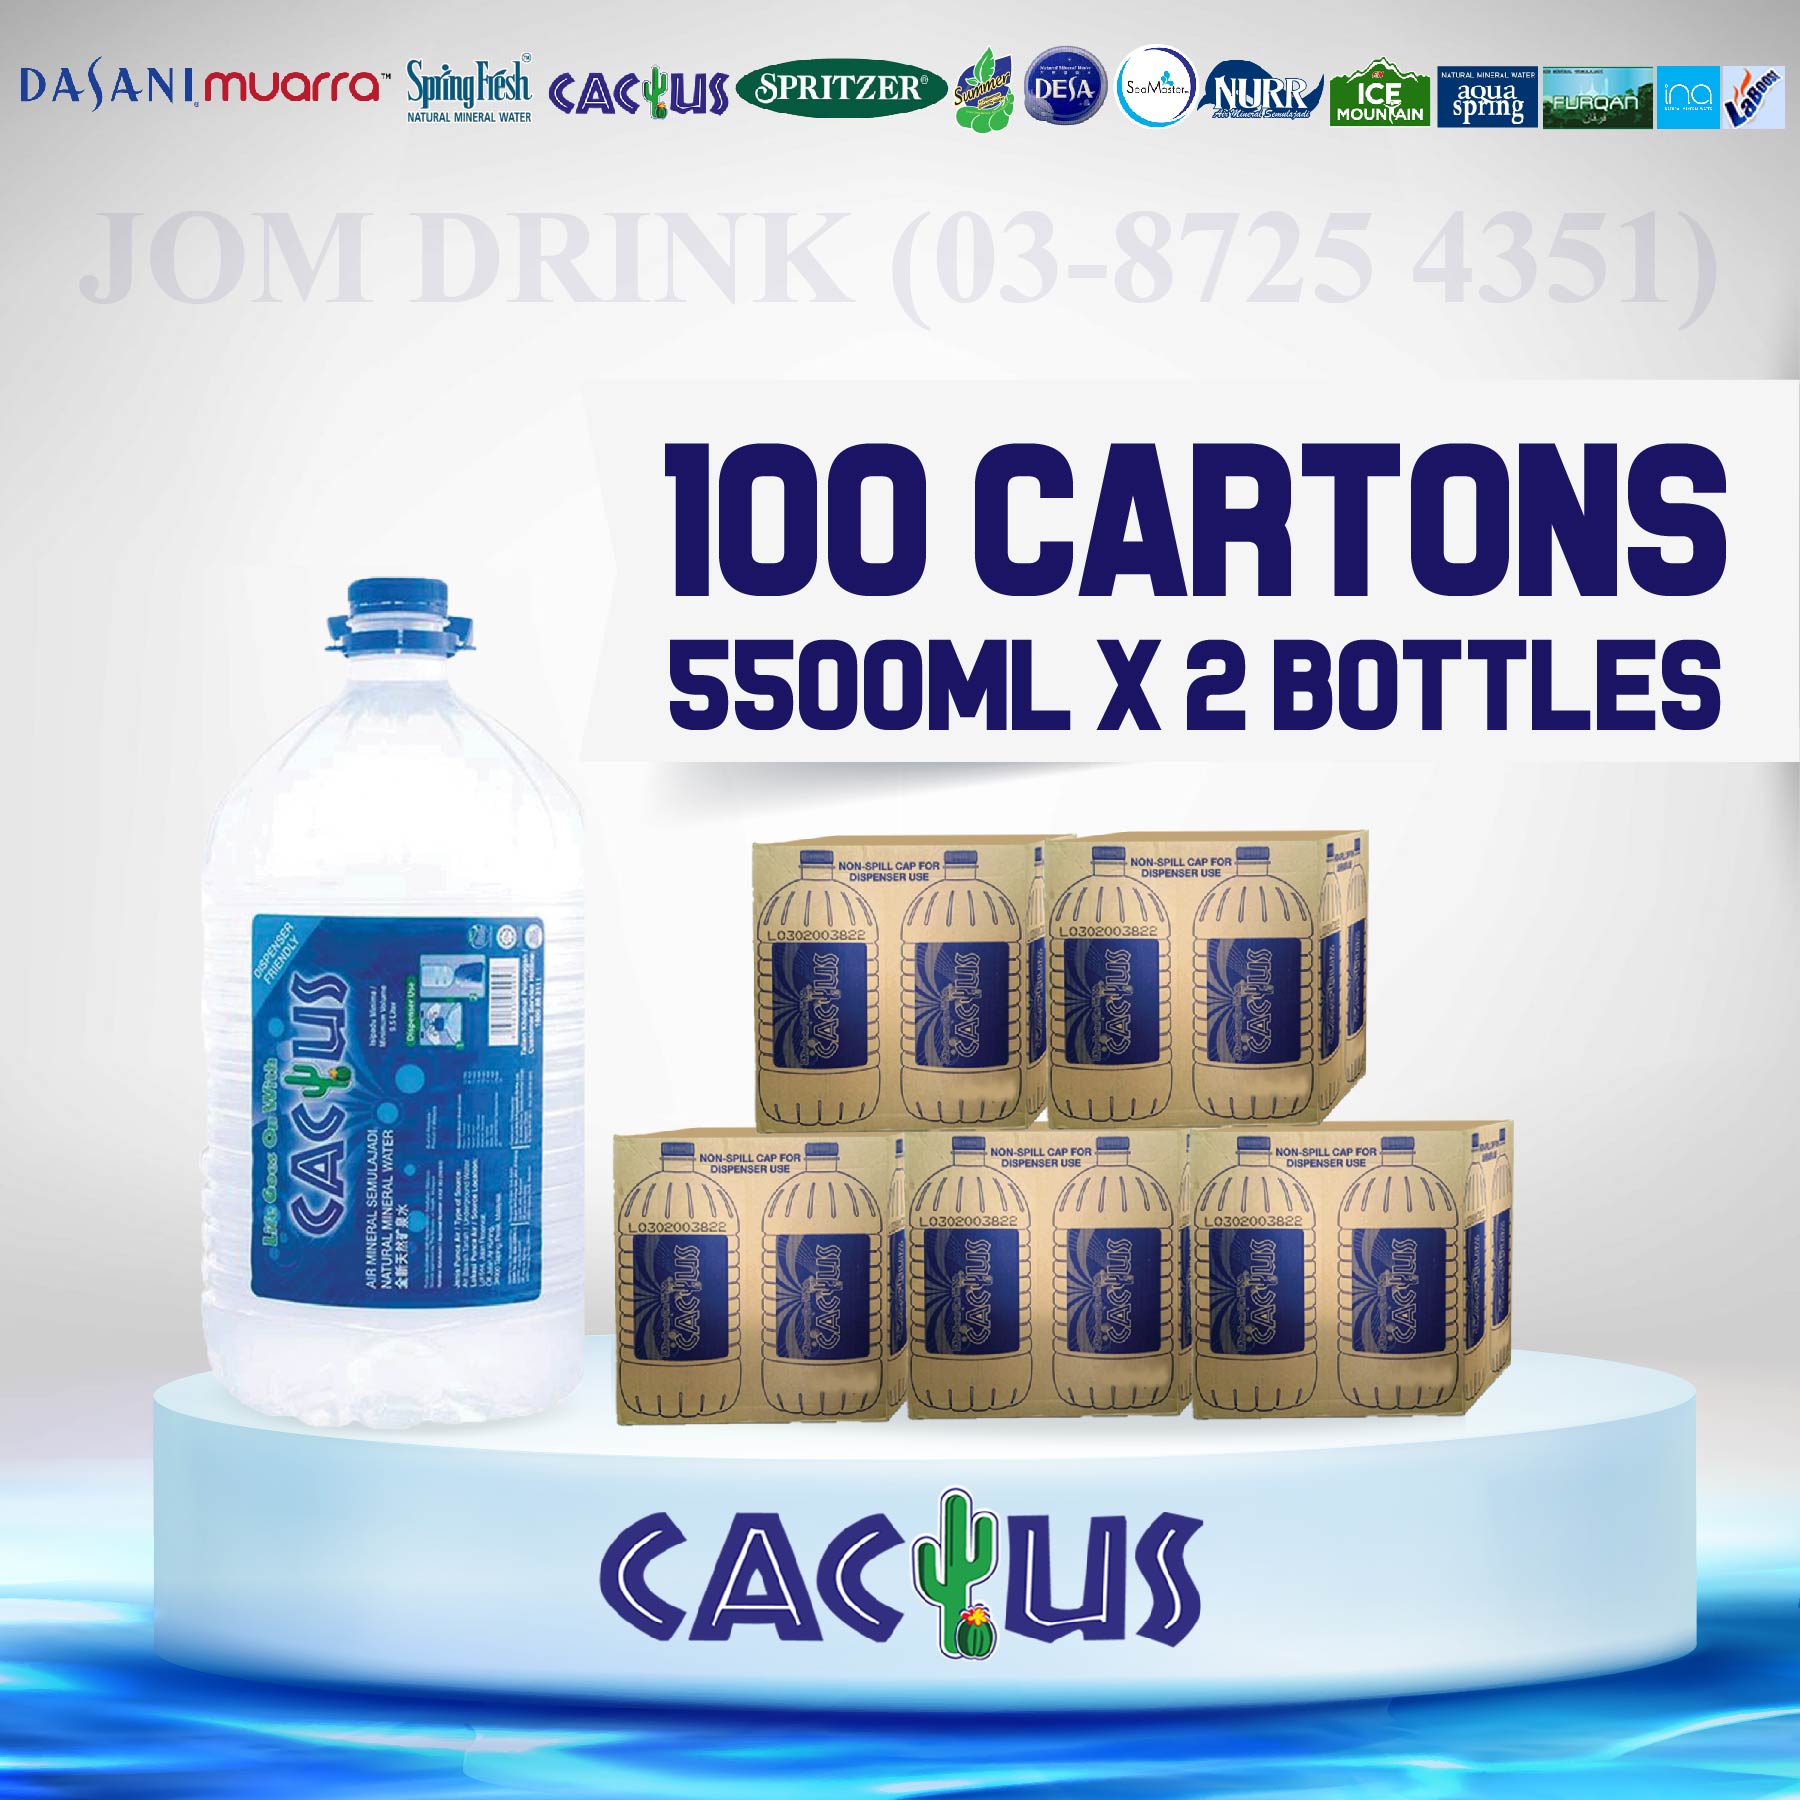 PACKAGES OF 100 BOXES : CACTUS MINERAL WATER 5500ML